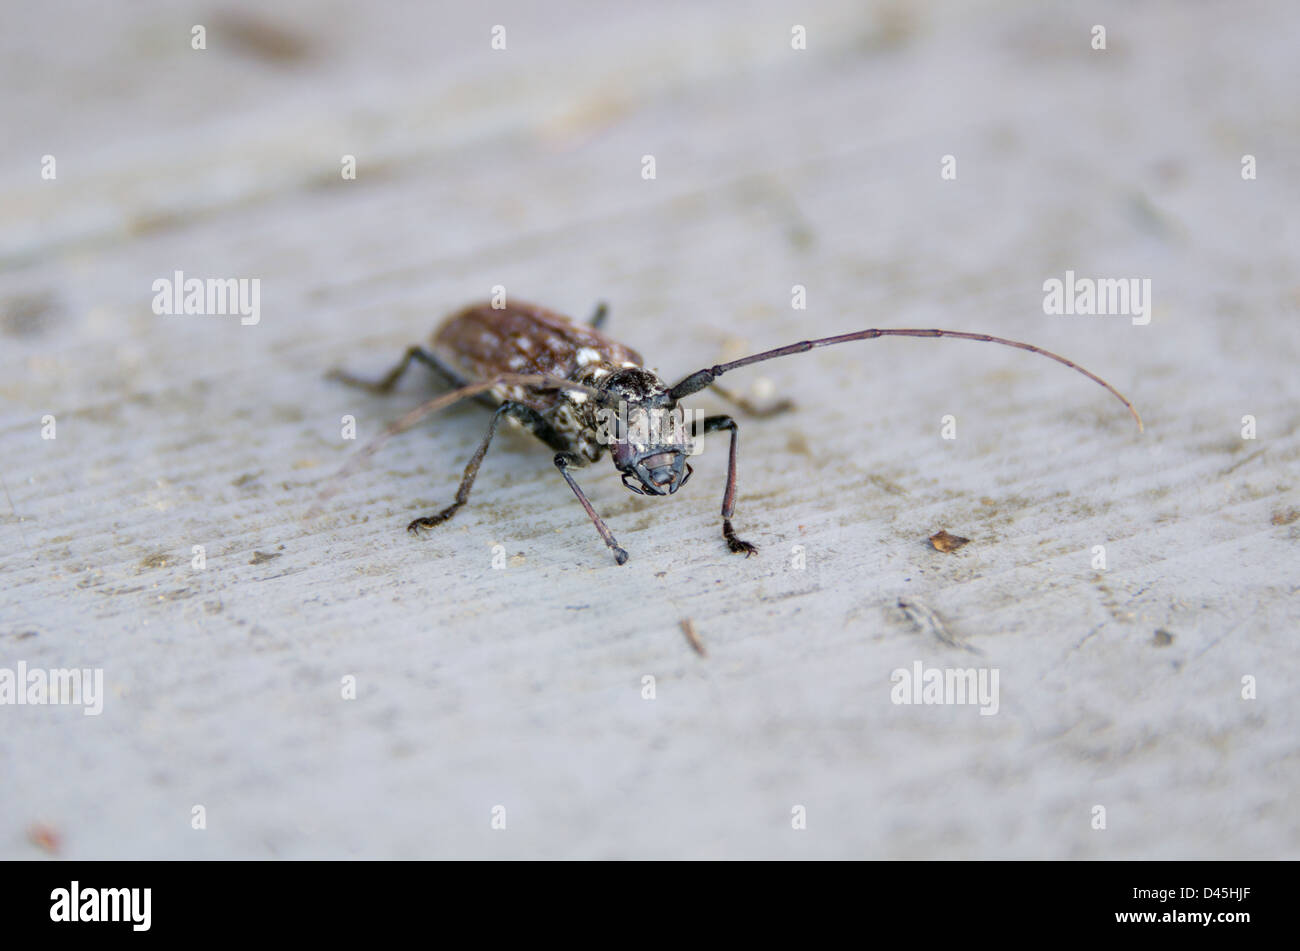 close-up view of Whitespotted Sawyer beetle Stock Photo